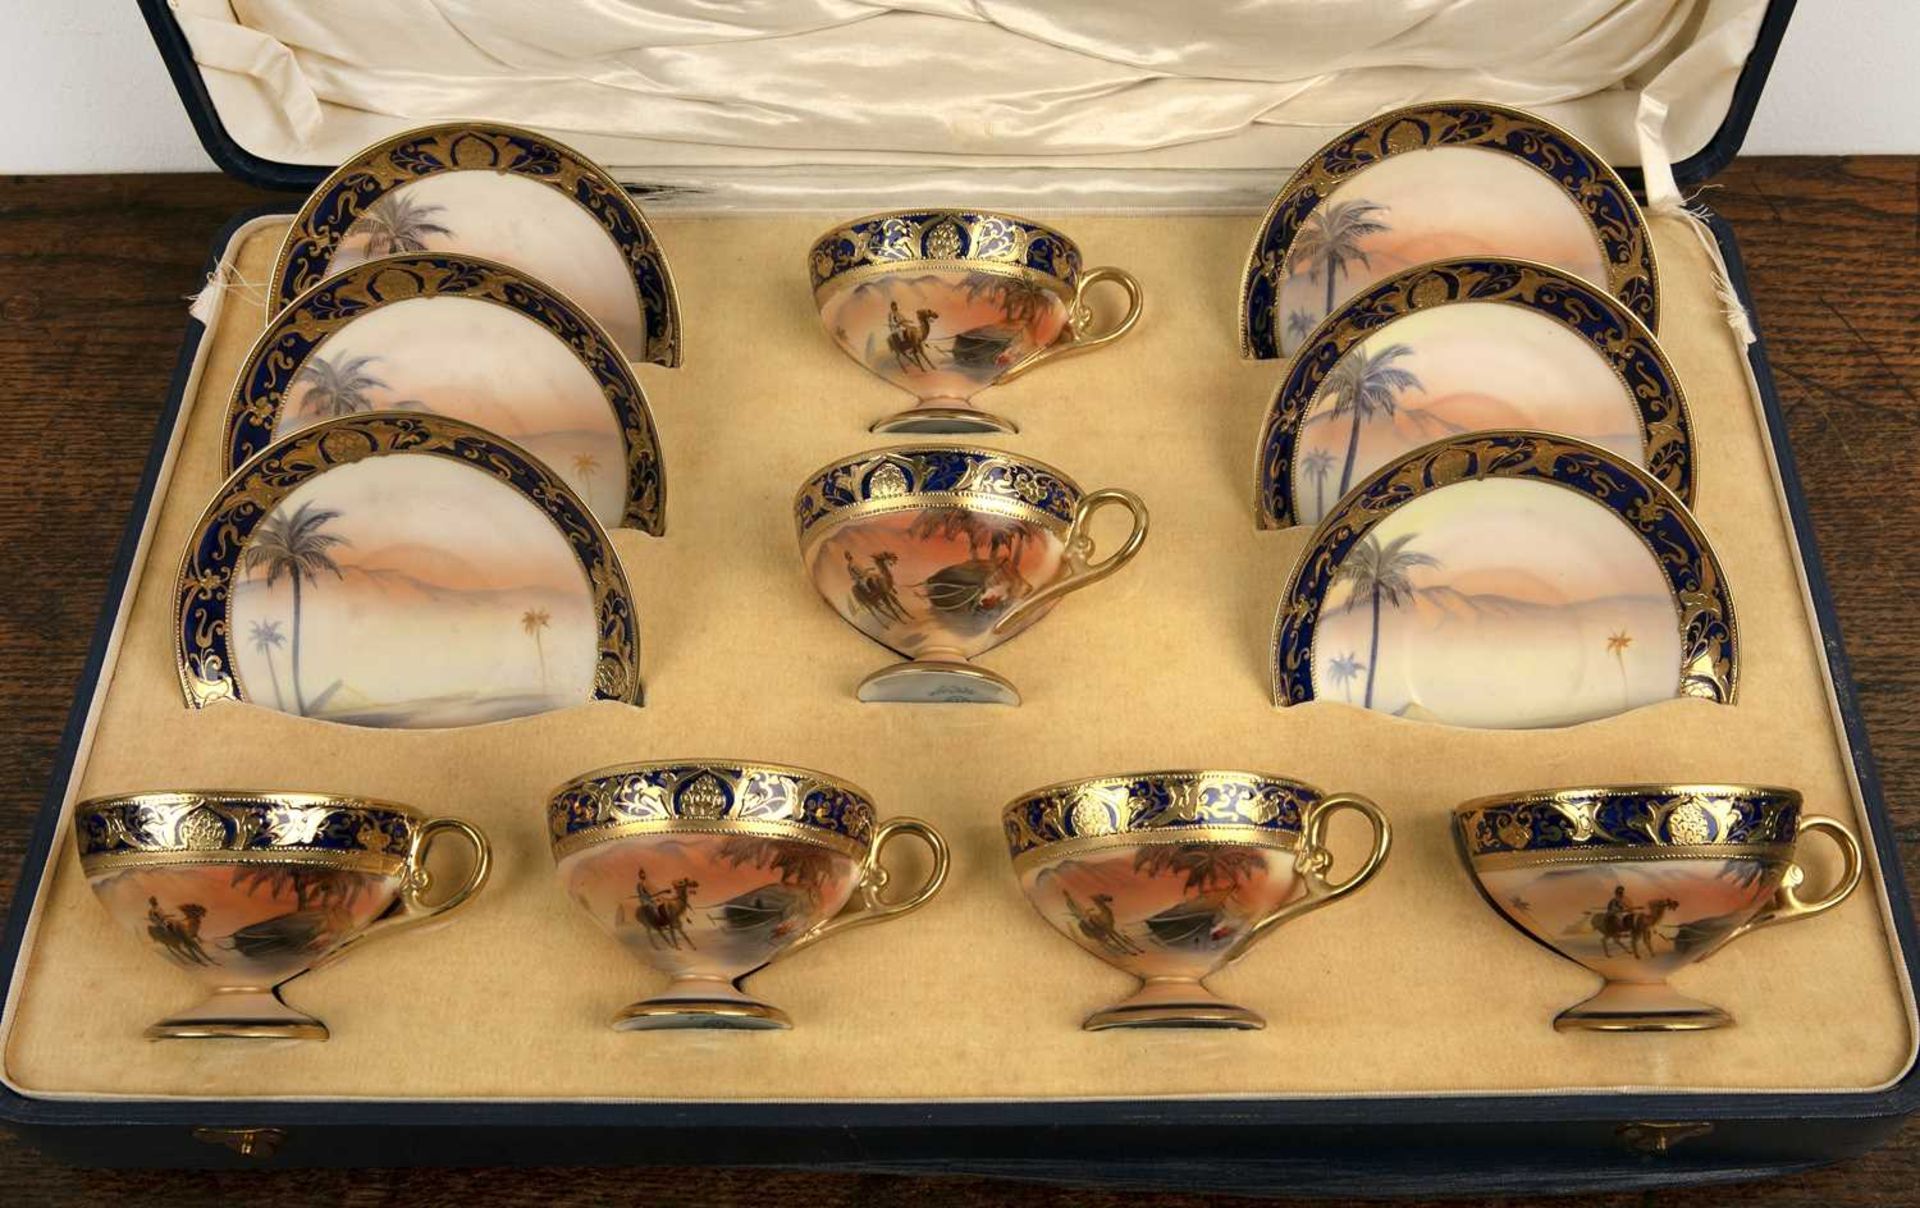 Cased Noritake porcelain tea set comprising of six cabinet teacups and saucers, decorated with